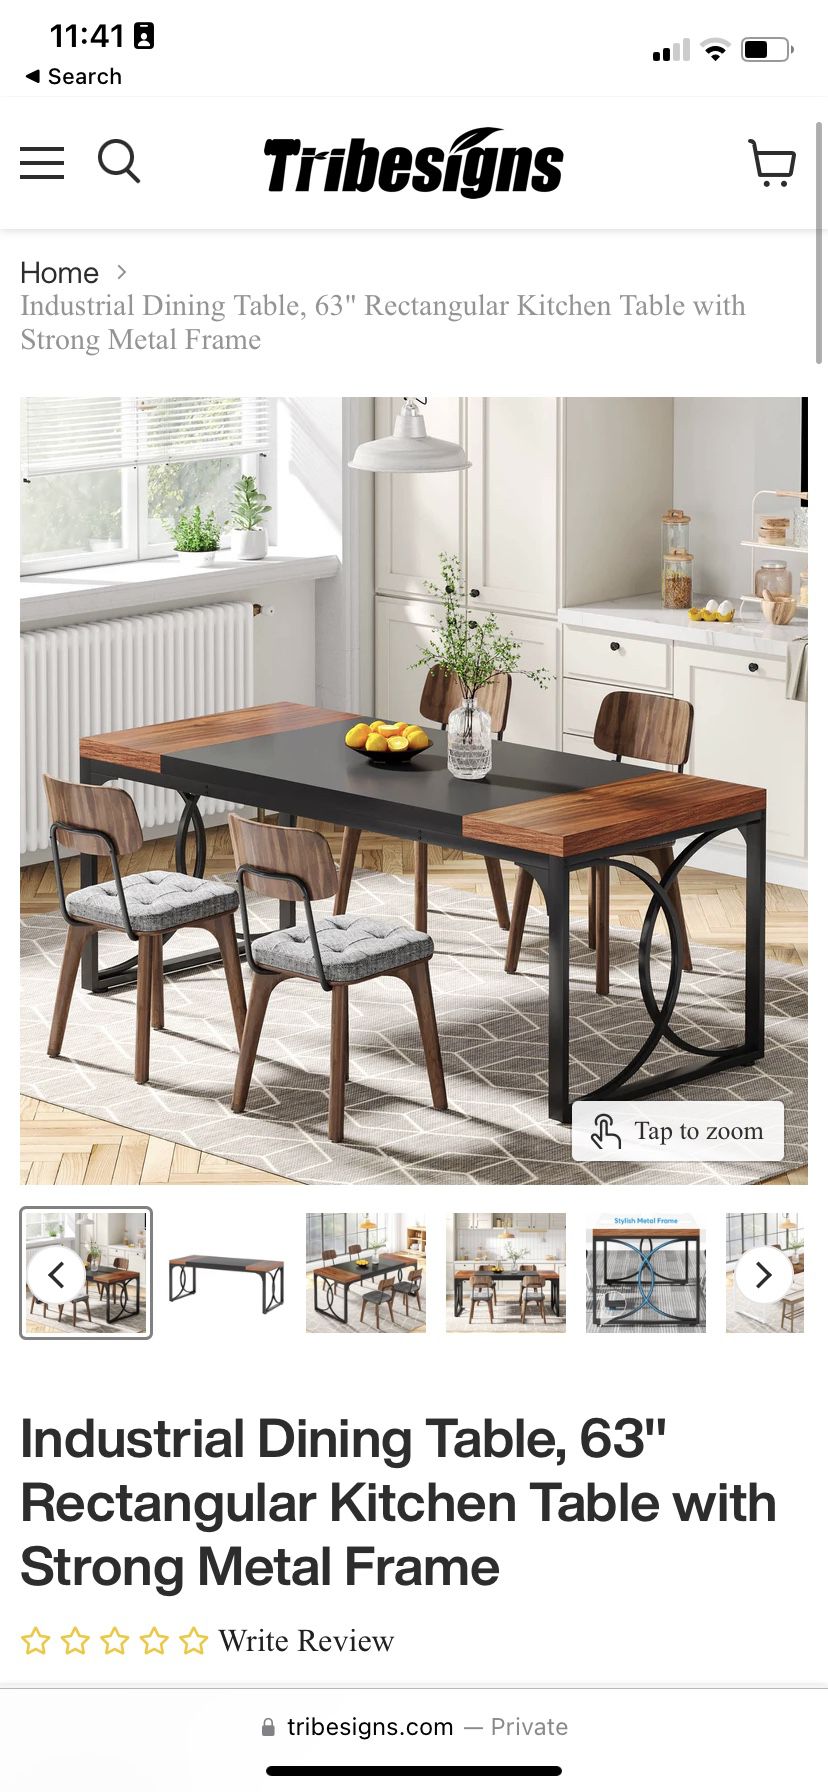 Industrial Dining Table, 63" Rectangular Kitchen Table with Strong Metal Frame